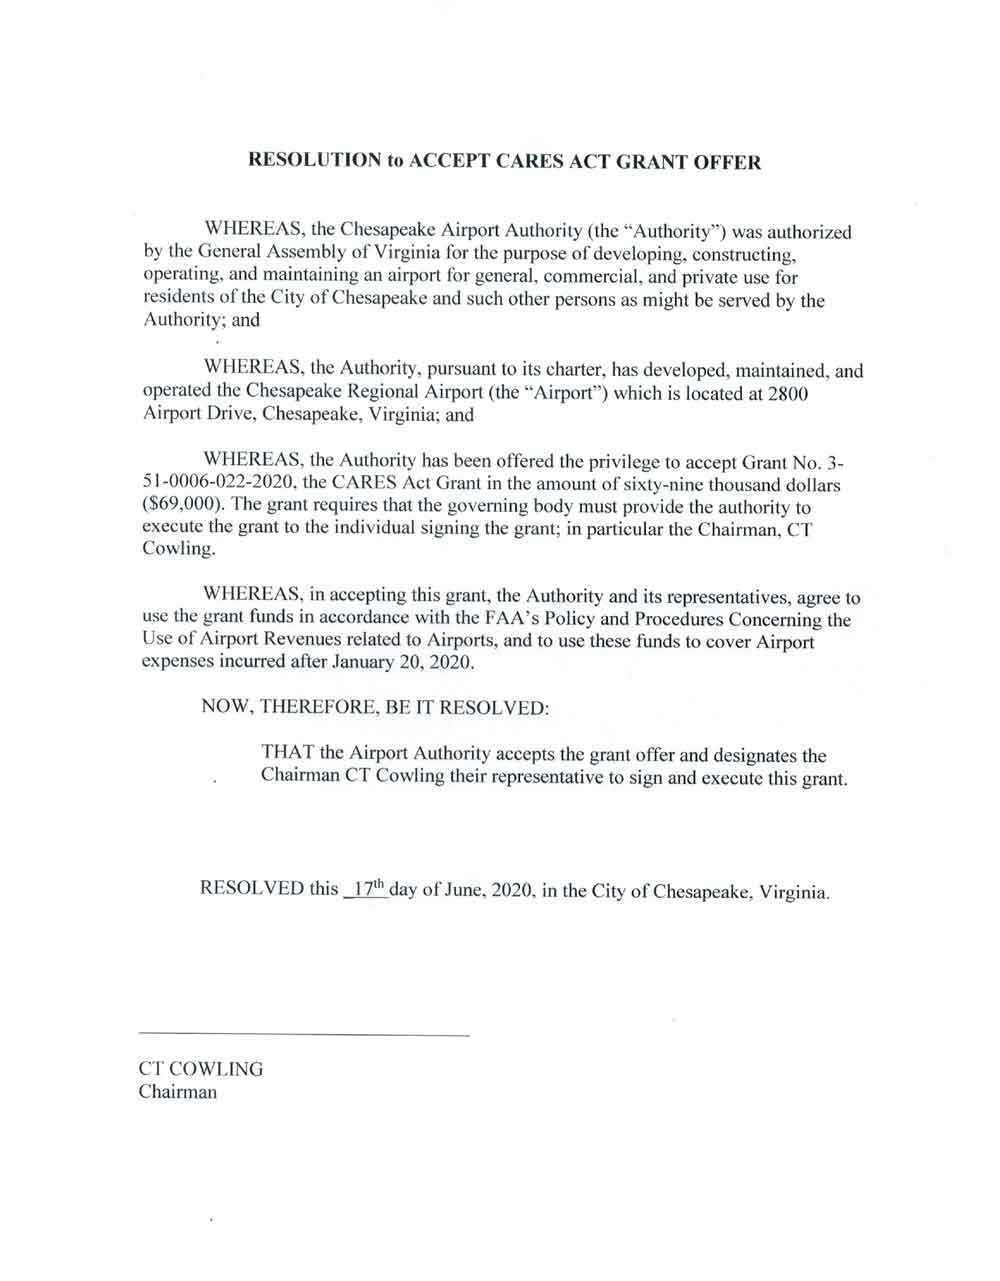 image of the resolution passed by the airport authority to accept cares act grant offer